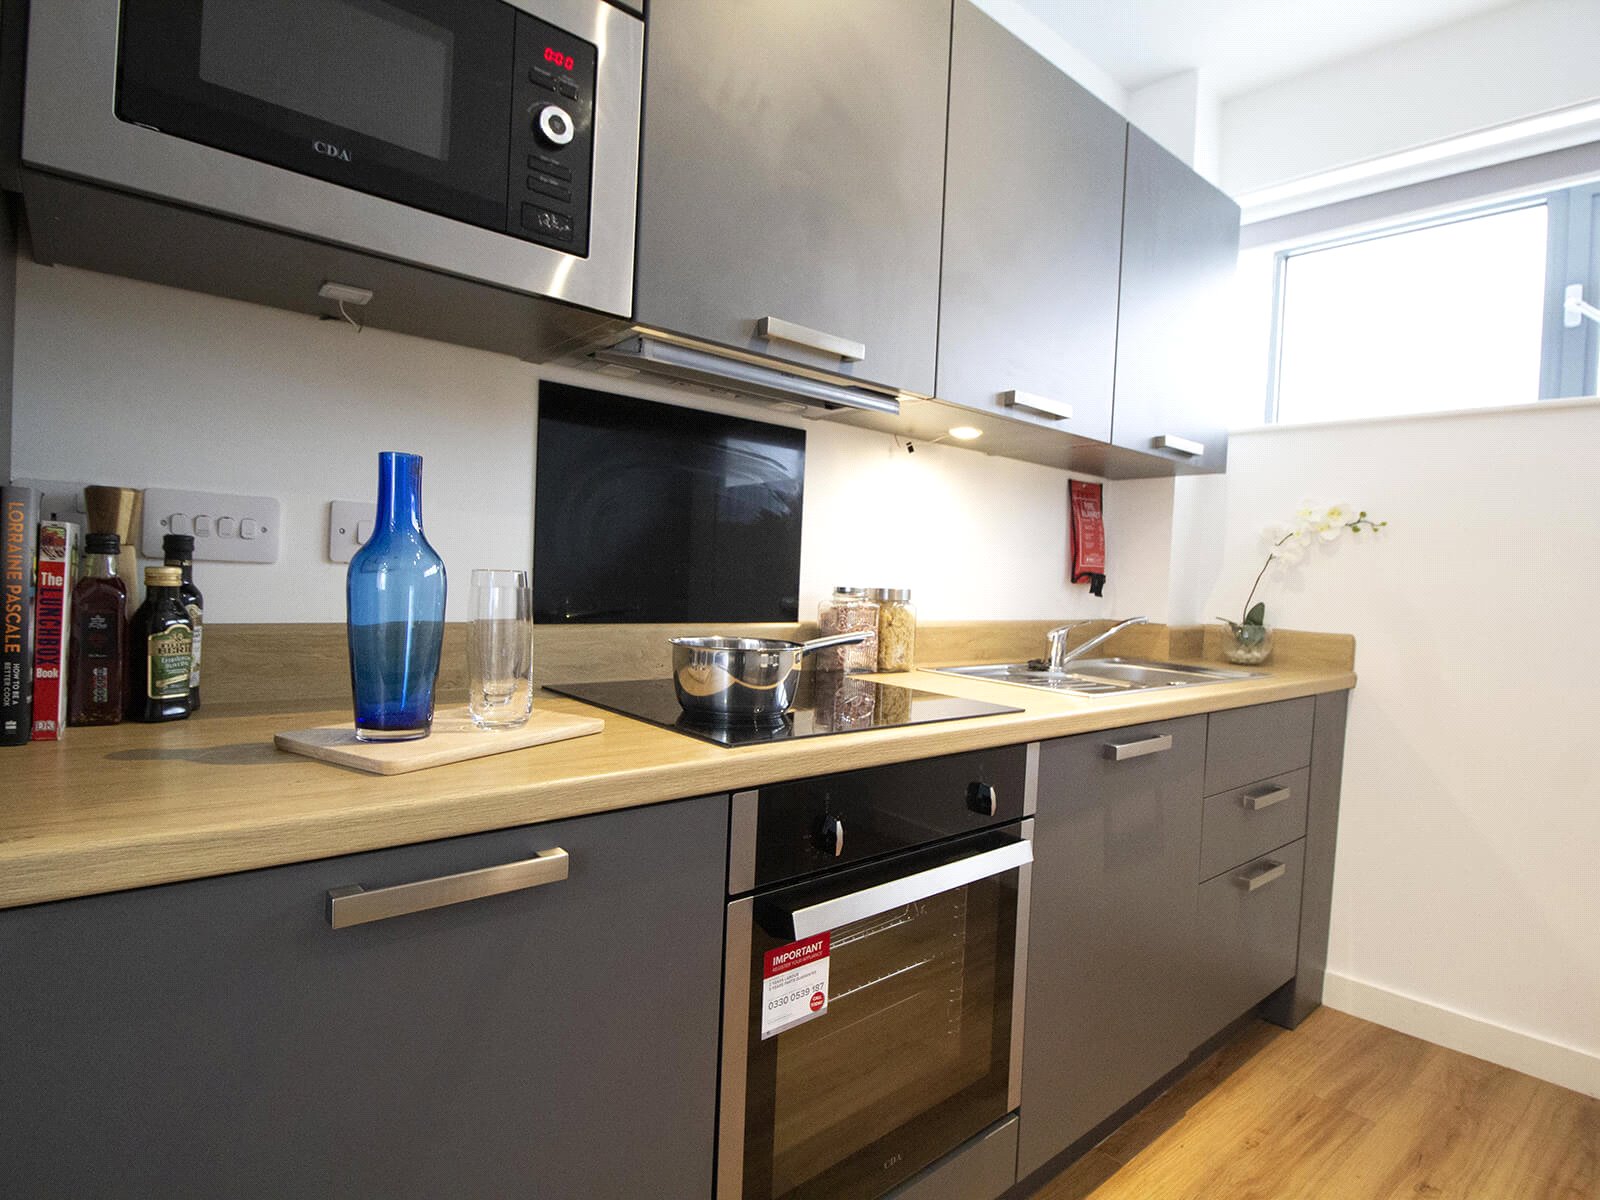 2 bed apartment for rent in Liverpool. From rentbunk.com